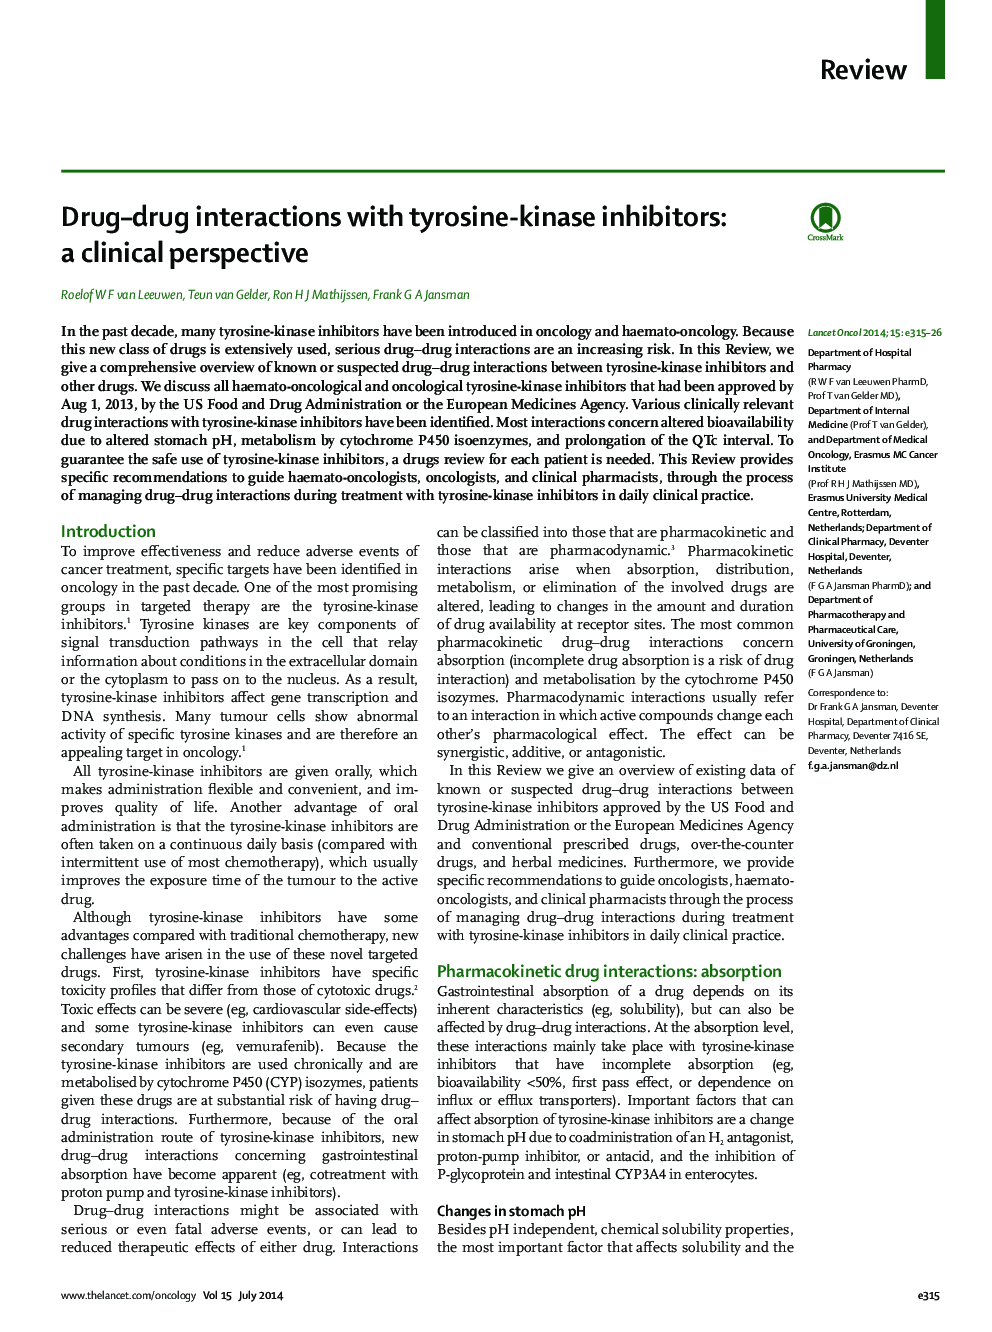 Drug–drug interactions with tyrosine-kinase inhibitors: a clinical perspective